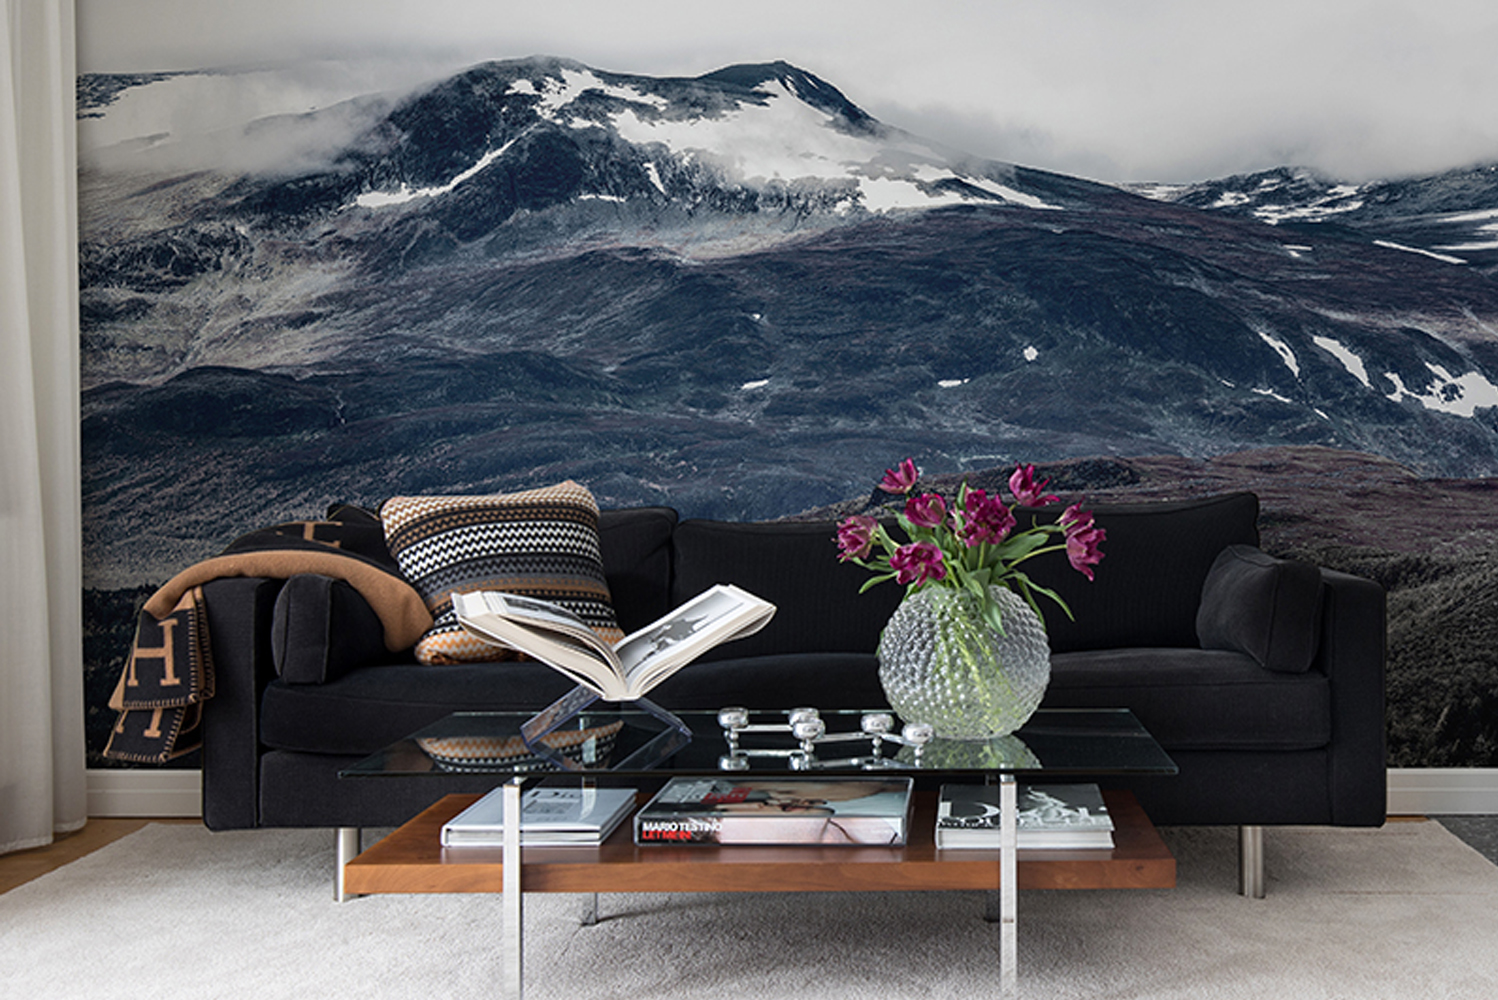 Rebel Walls launched a new wallpaper collection Scandinavia